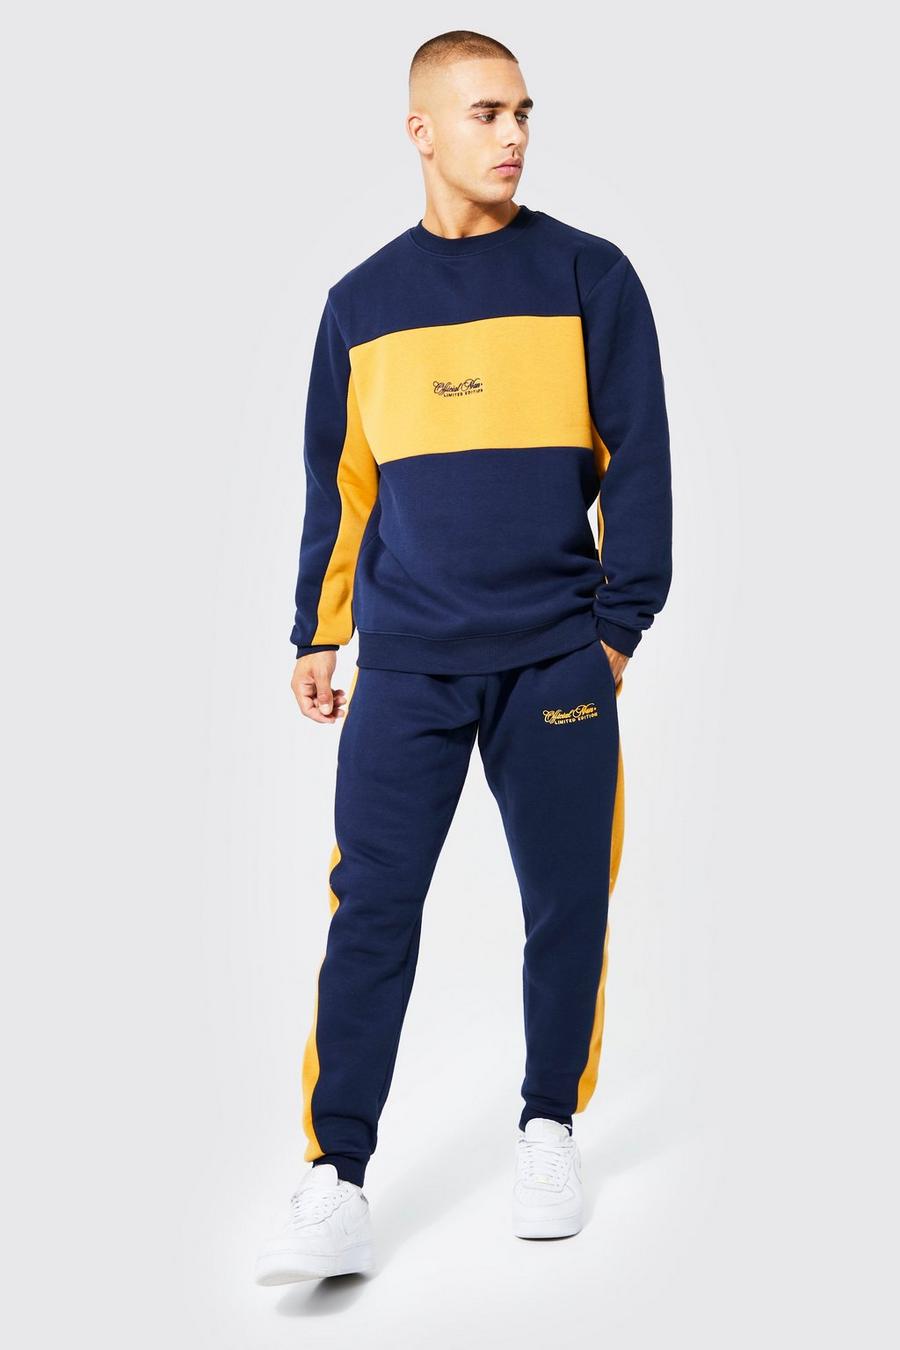 Navy marine Official Man Colour Block Sweater Tracksuit